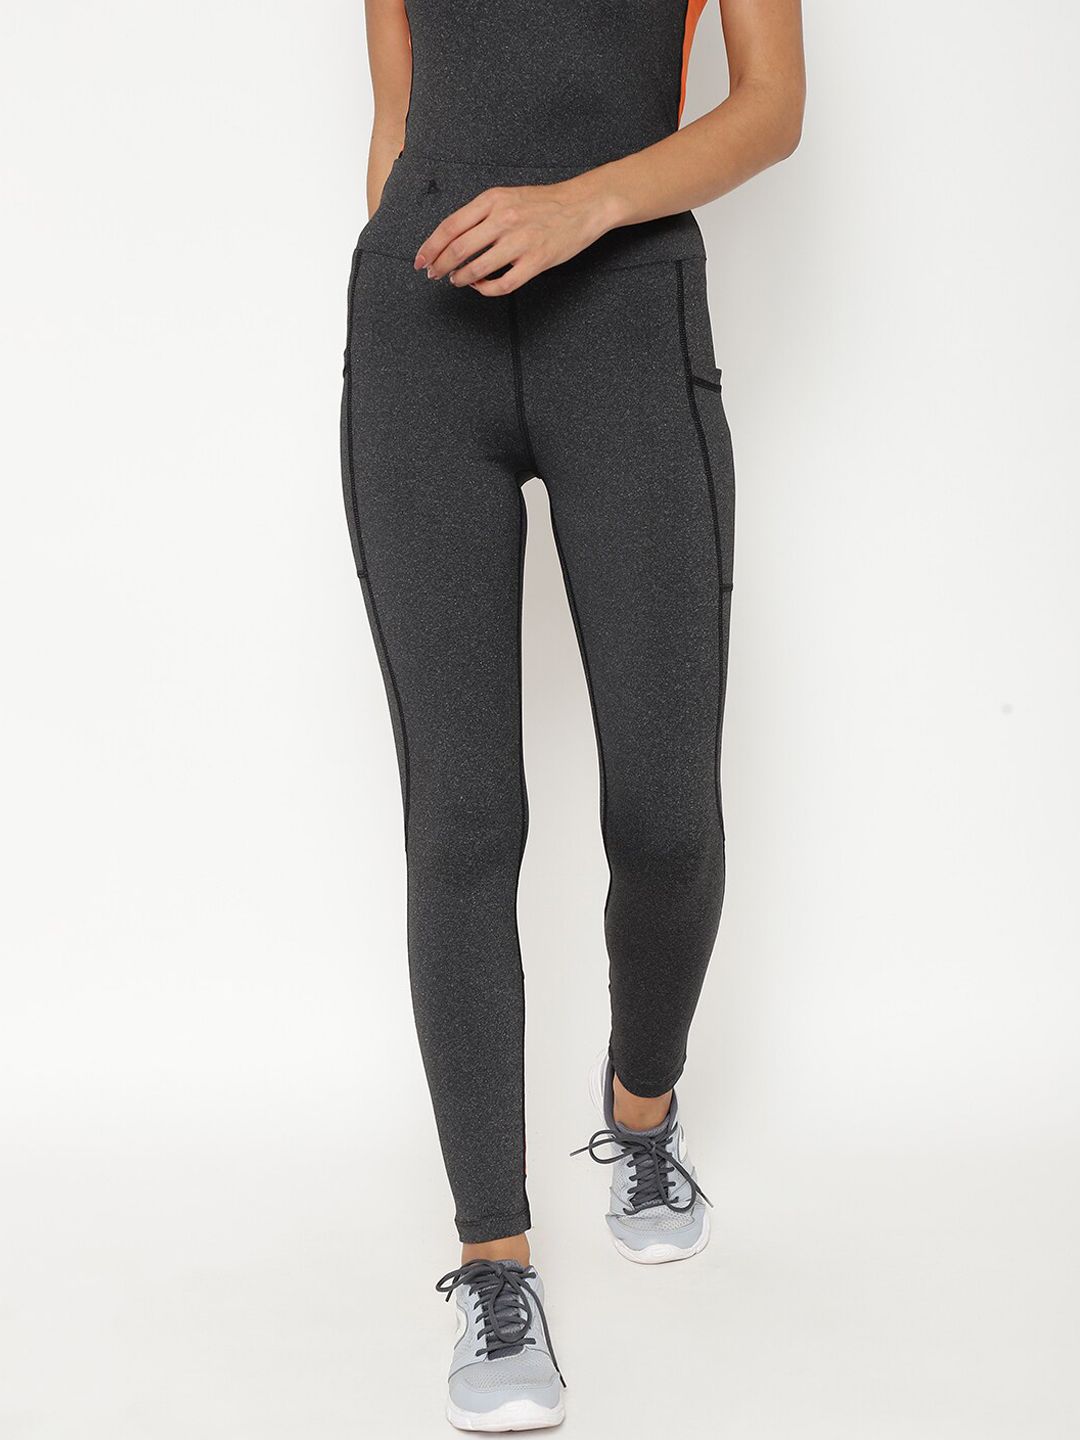 Chkokko Women Grey Solid Yoga Stretchable Gym Tights Price in India